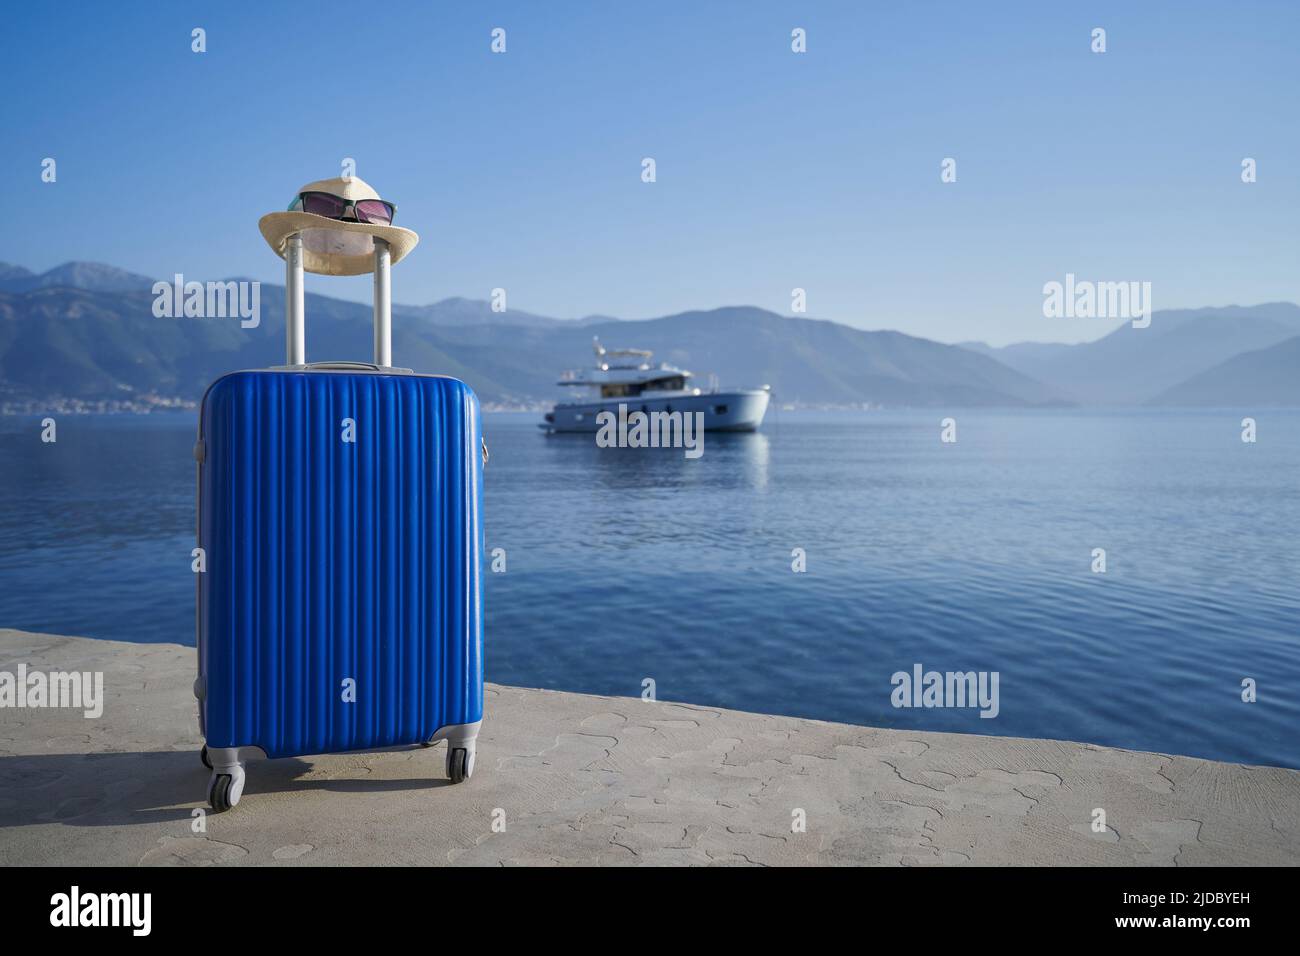 Blue suitcase by the sea against yacht, travel concep. Stock Photo